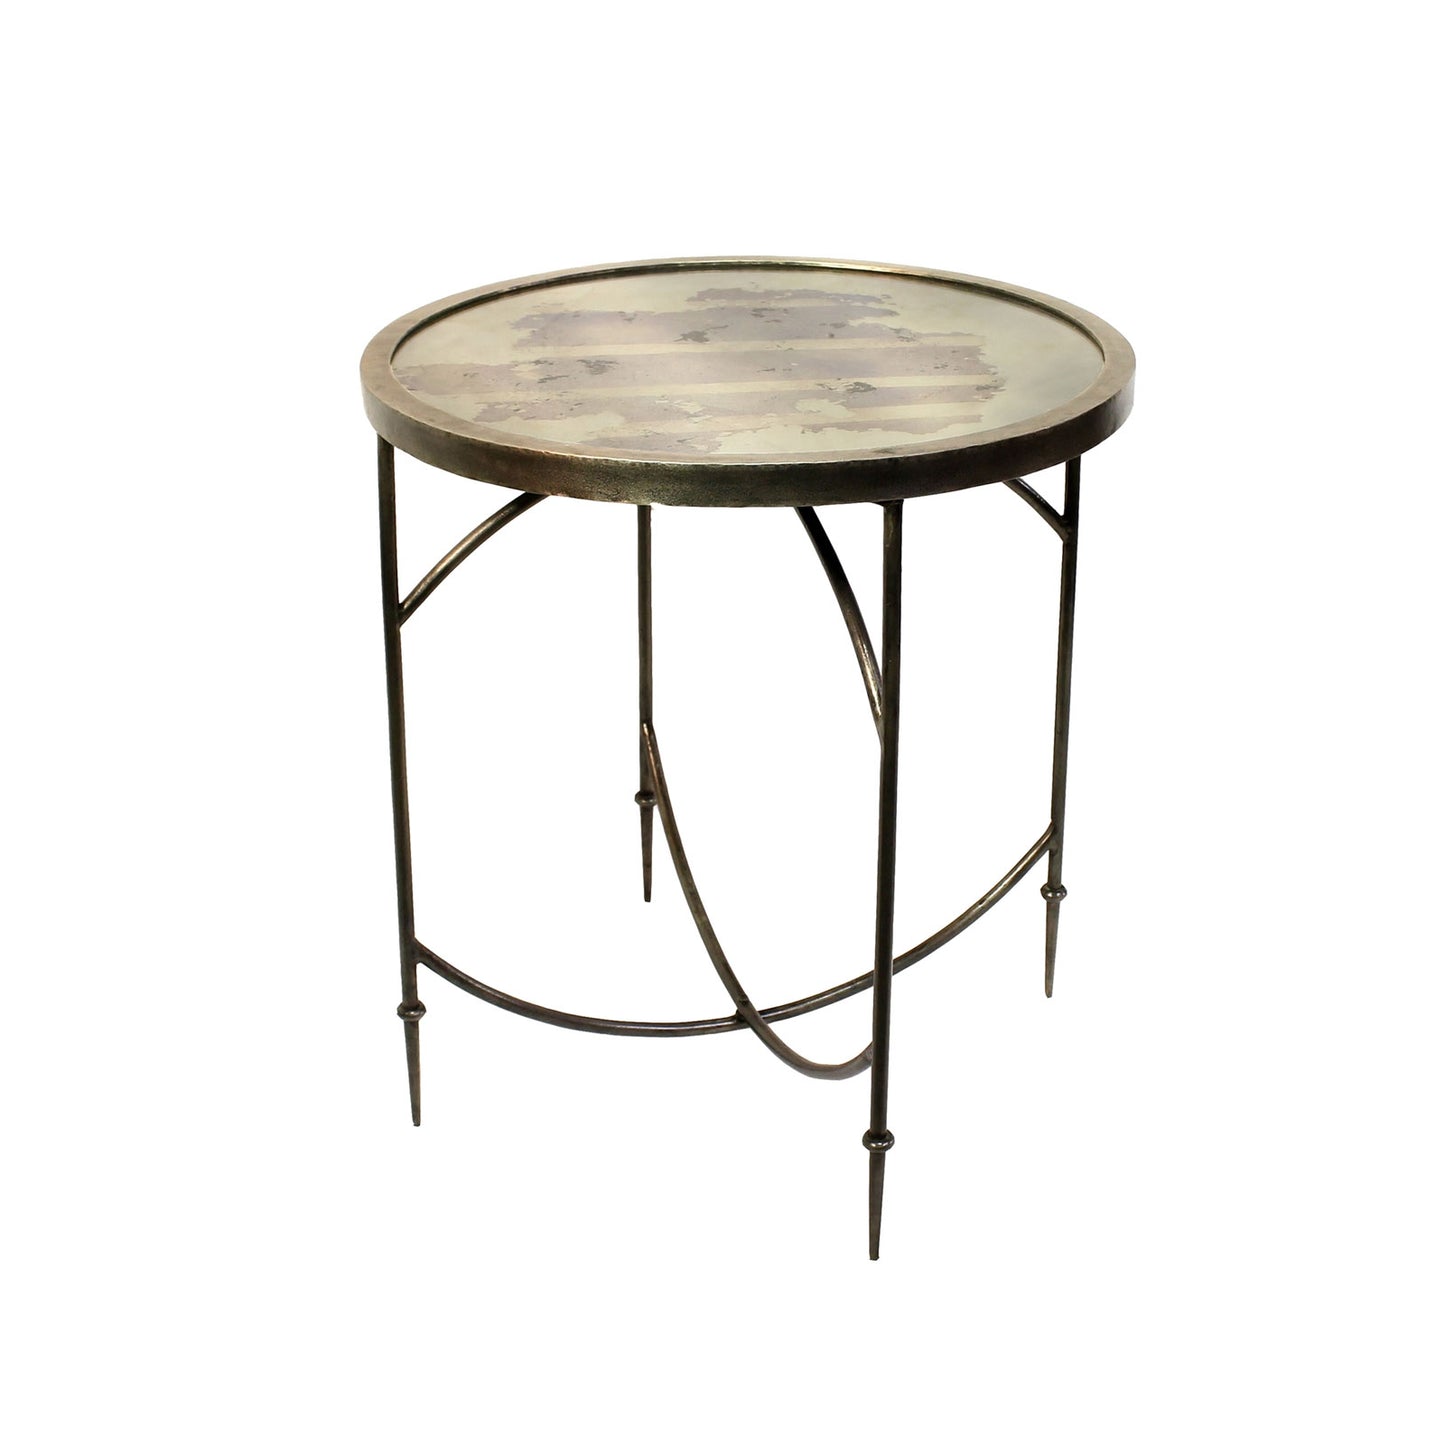 Mirrored Side Table in Antique Nickel (Pick Up / Local Delivery Only)